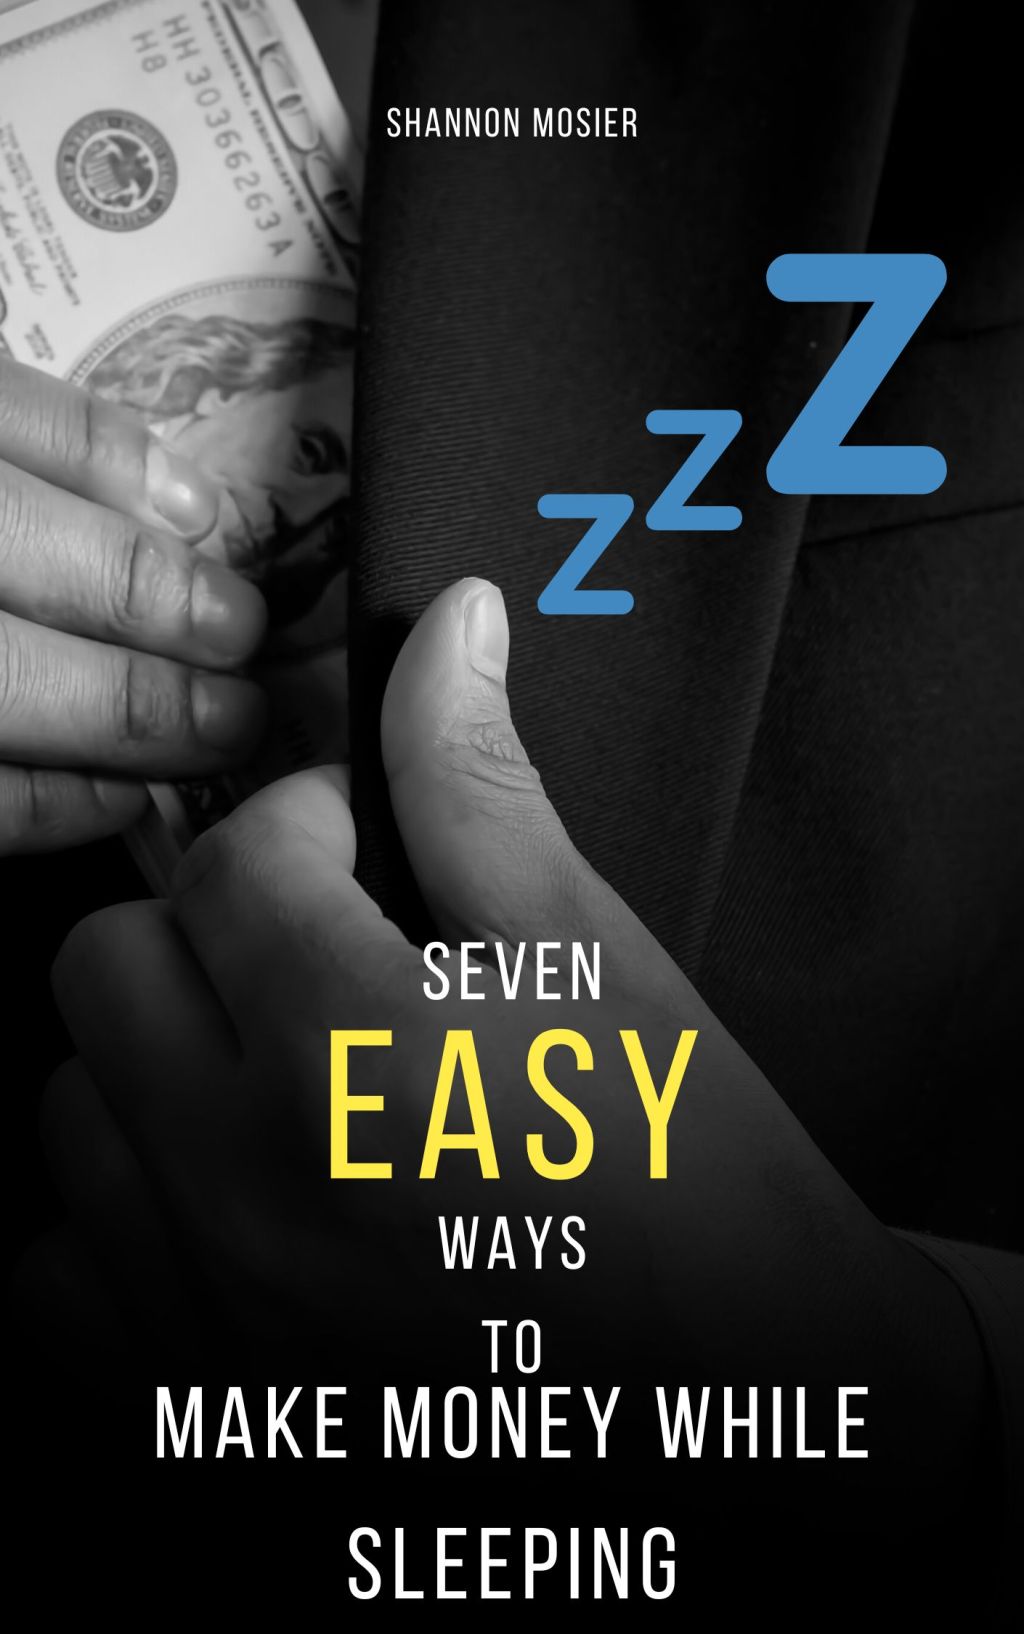 Discover Financial Freedom: Unveiling “Learn Seven Easy Ways To Make Big Money While You Sleep” eBook!